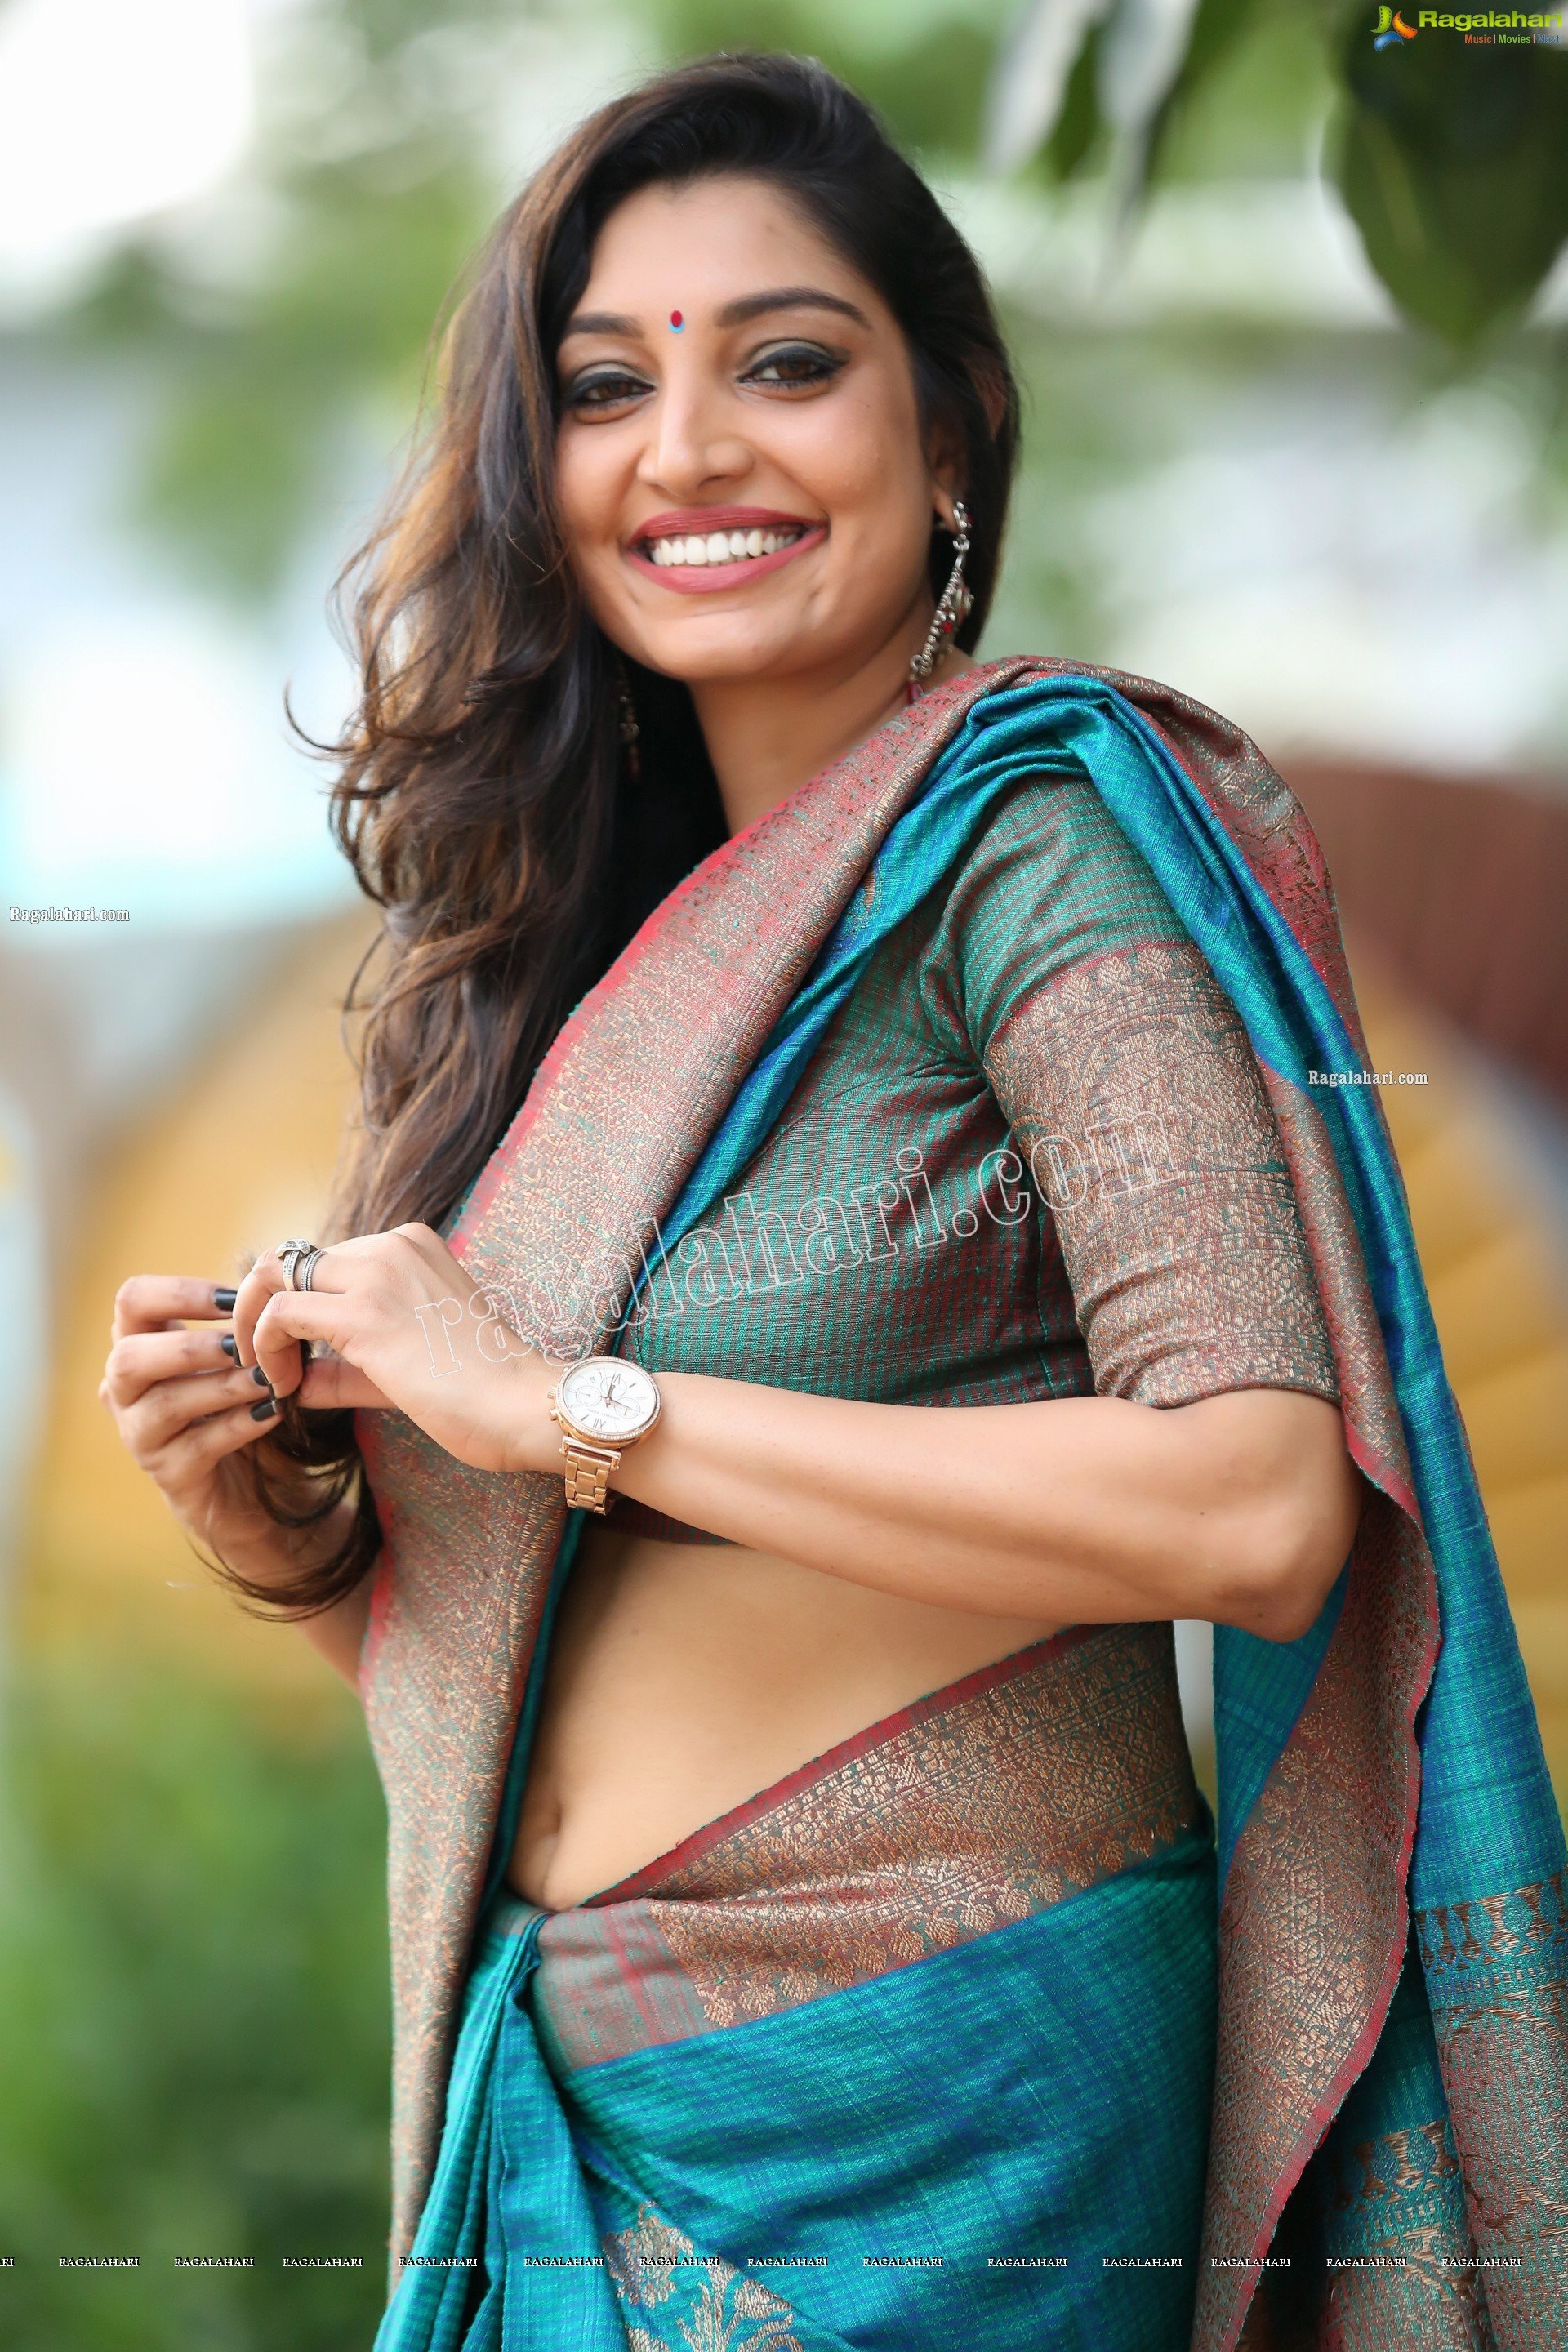 Rithu Manthra in Teal Blue Saree Exclusive Photo Shoot